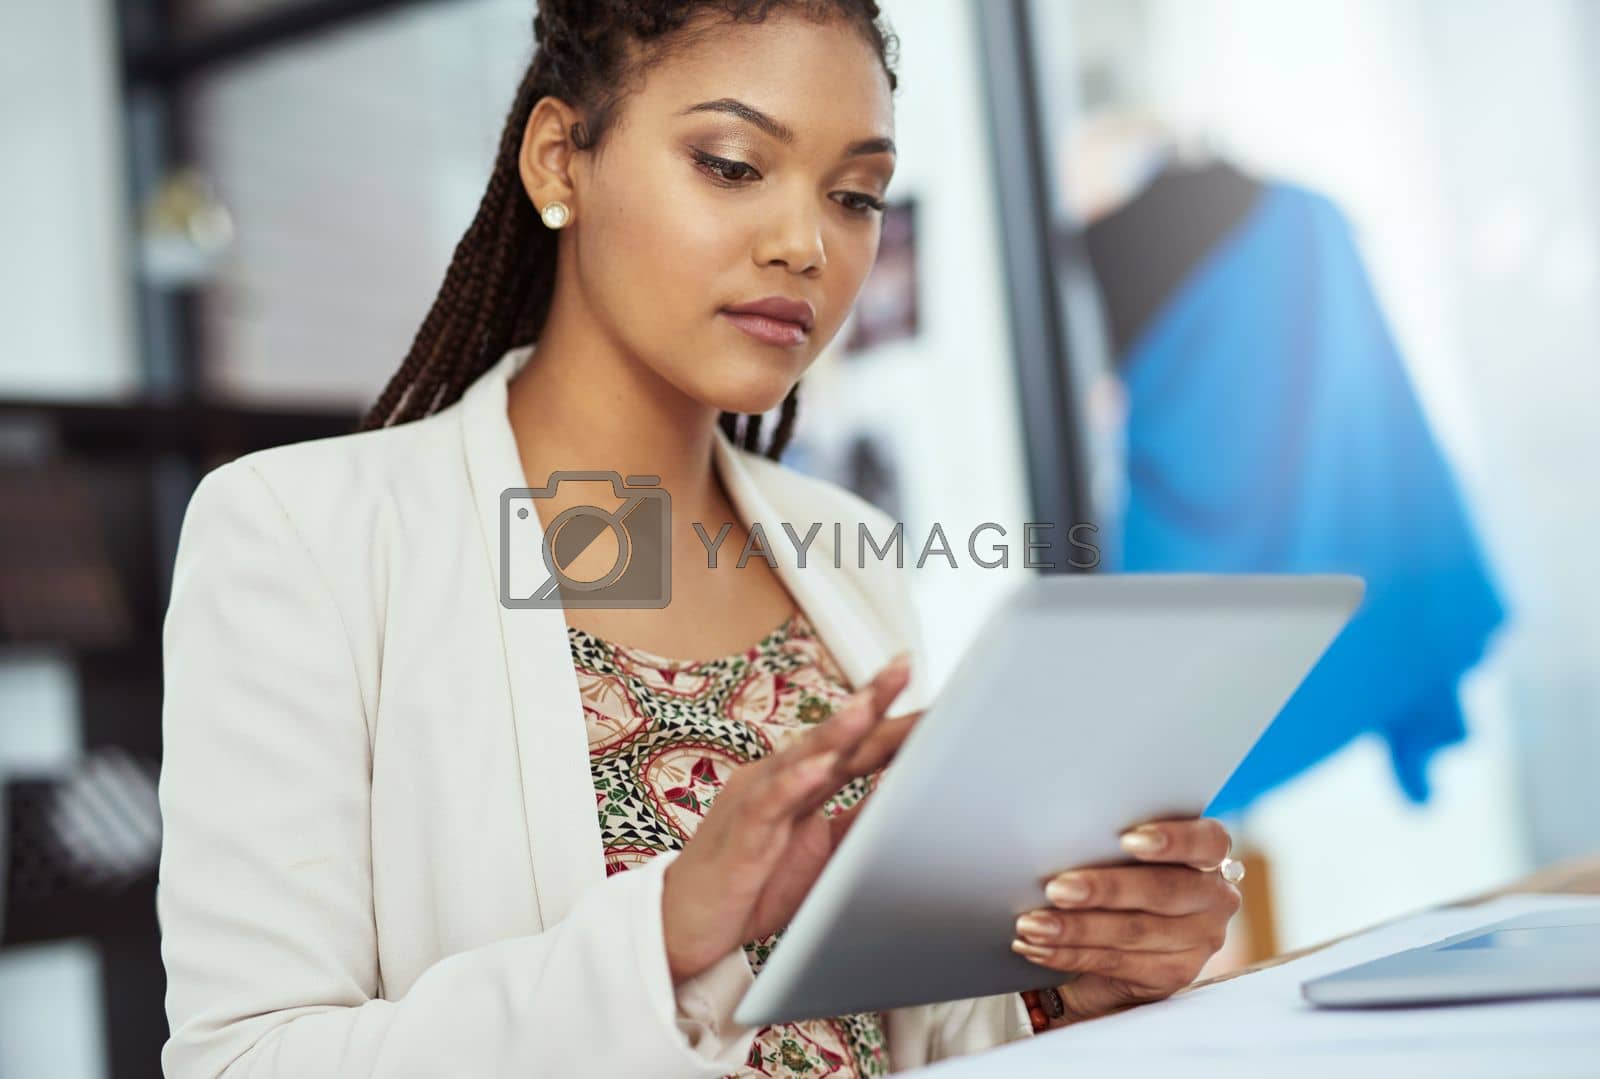 Royalty free image of Shes a modern day fashion designer. a young fashion designer working on her tablet. by YuriArcurs